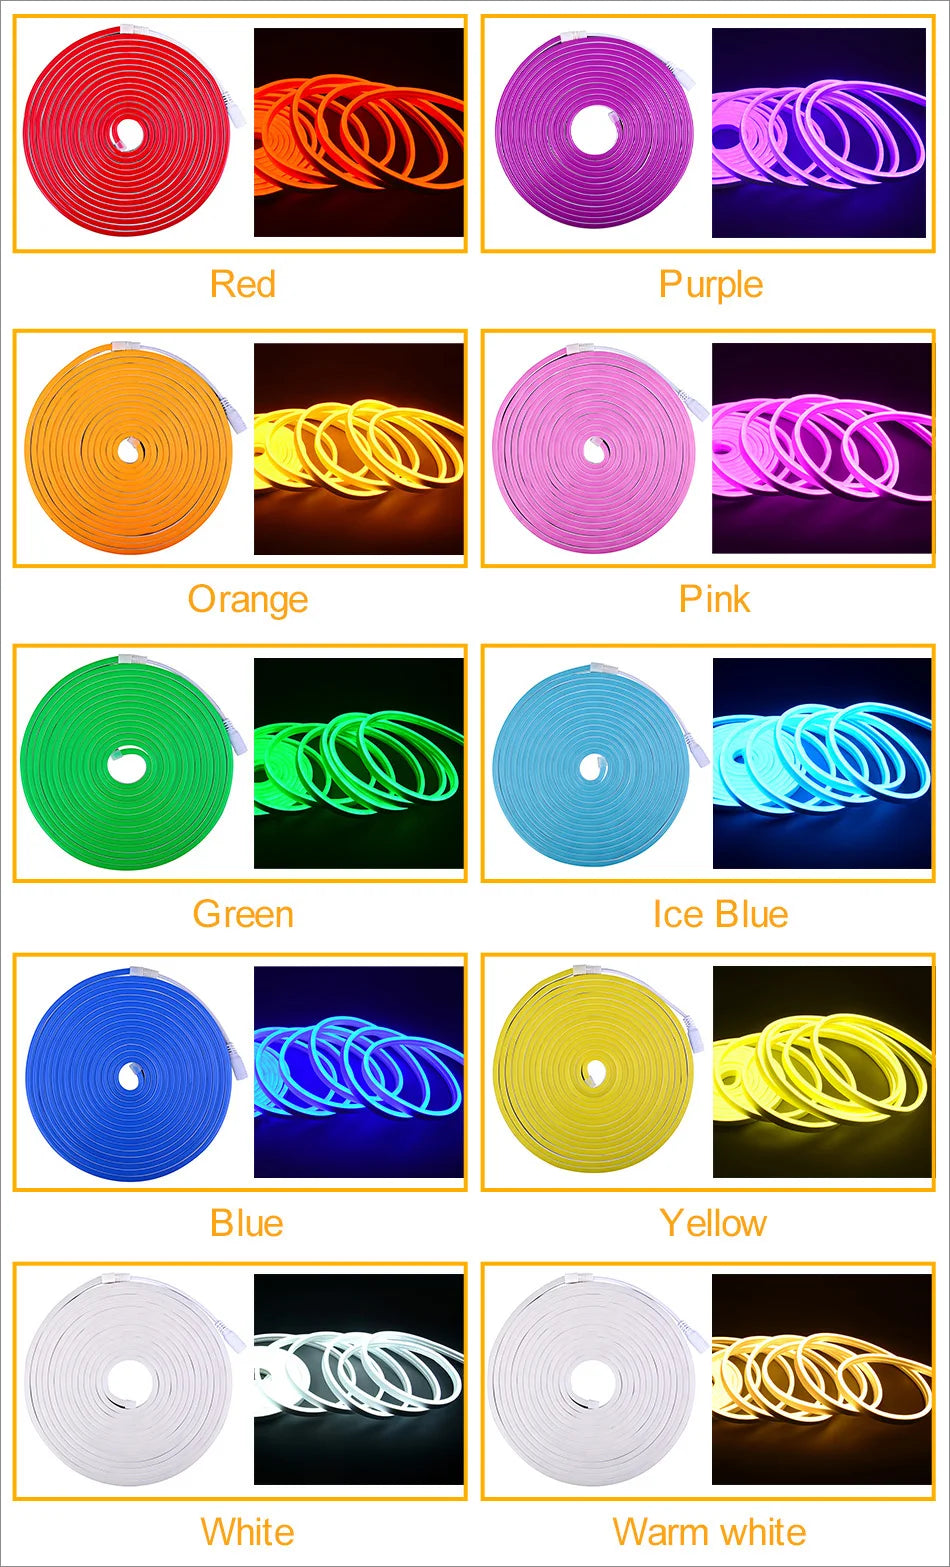 DC12V LED Neon Strip Light, Vibrant color assortment for versatile decoration: red, purple, orange, pink, green, blue, ice blue, yellow, and warm white.